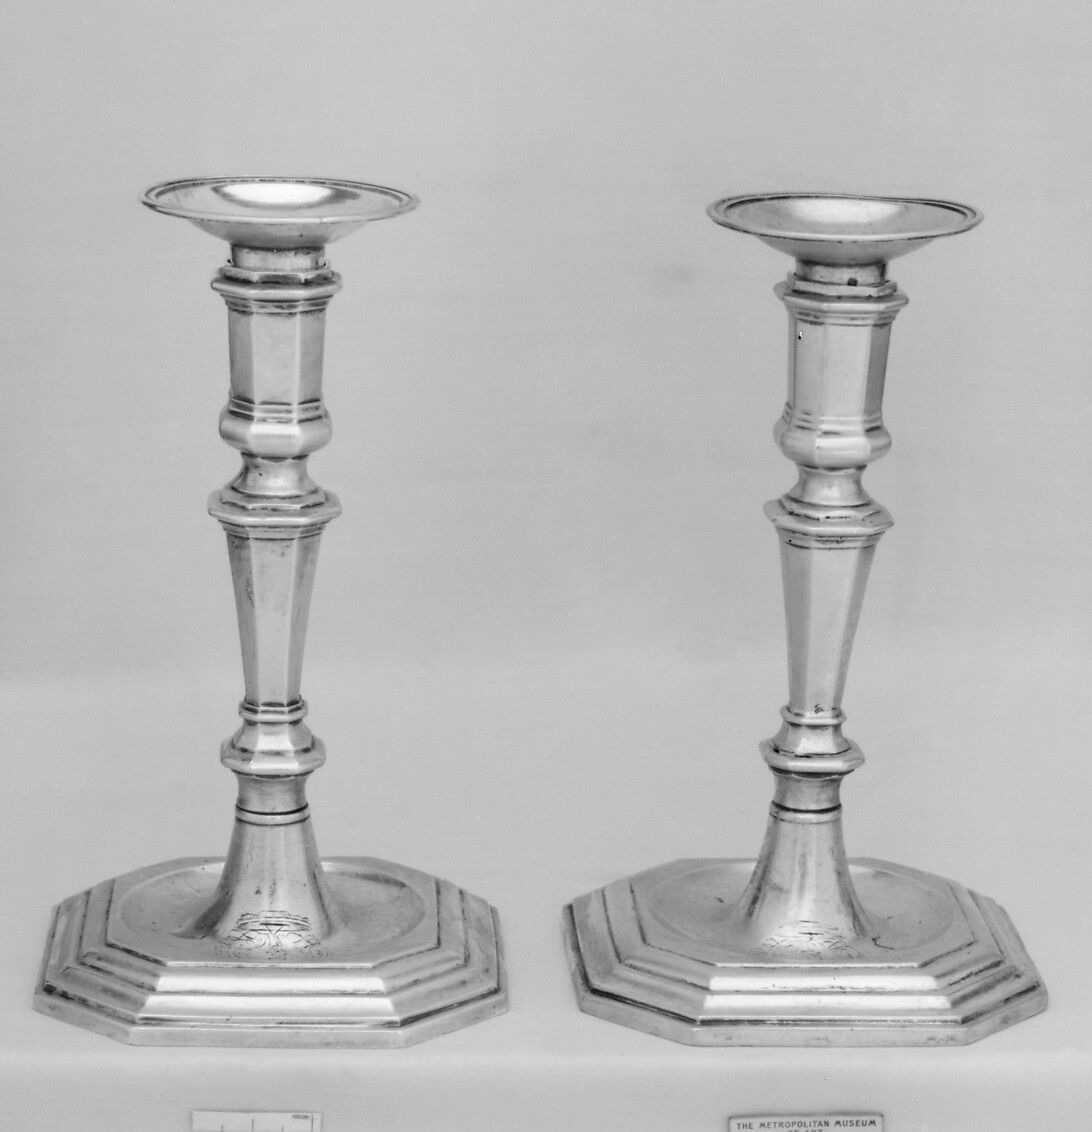 Candlestick (one of a pair), Ludovico Barchi (working 1716–30), Silver, Italian, Rome 